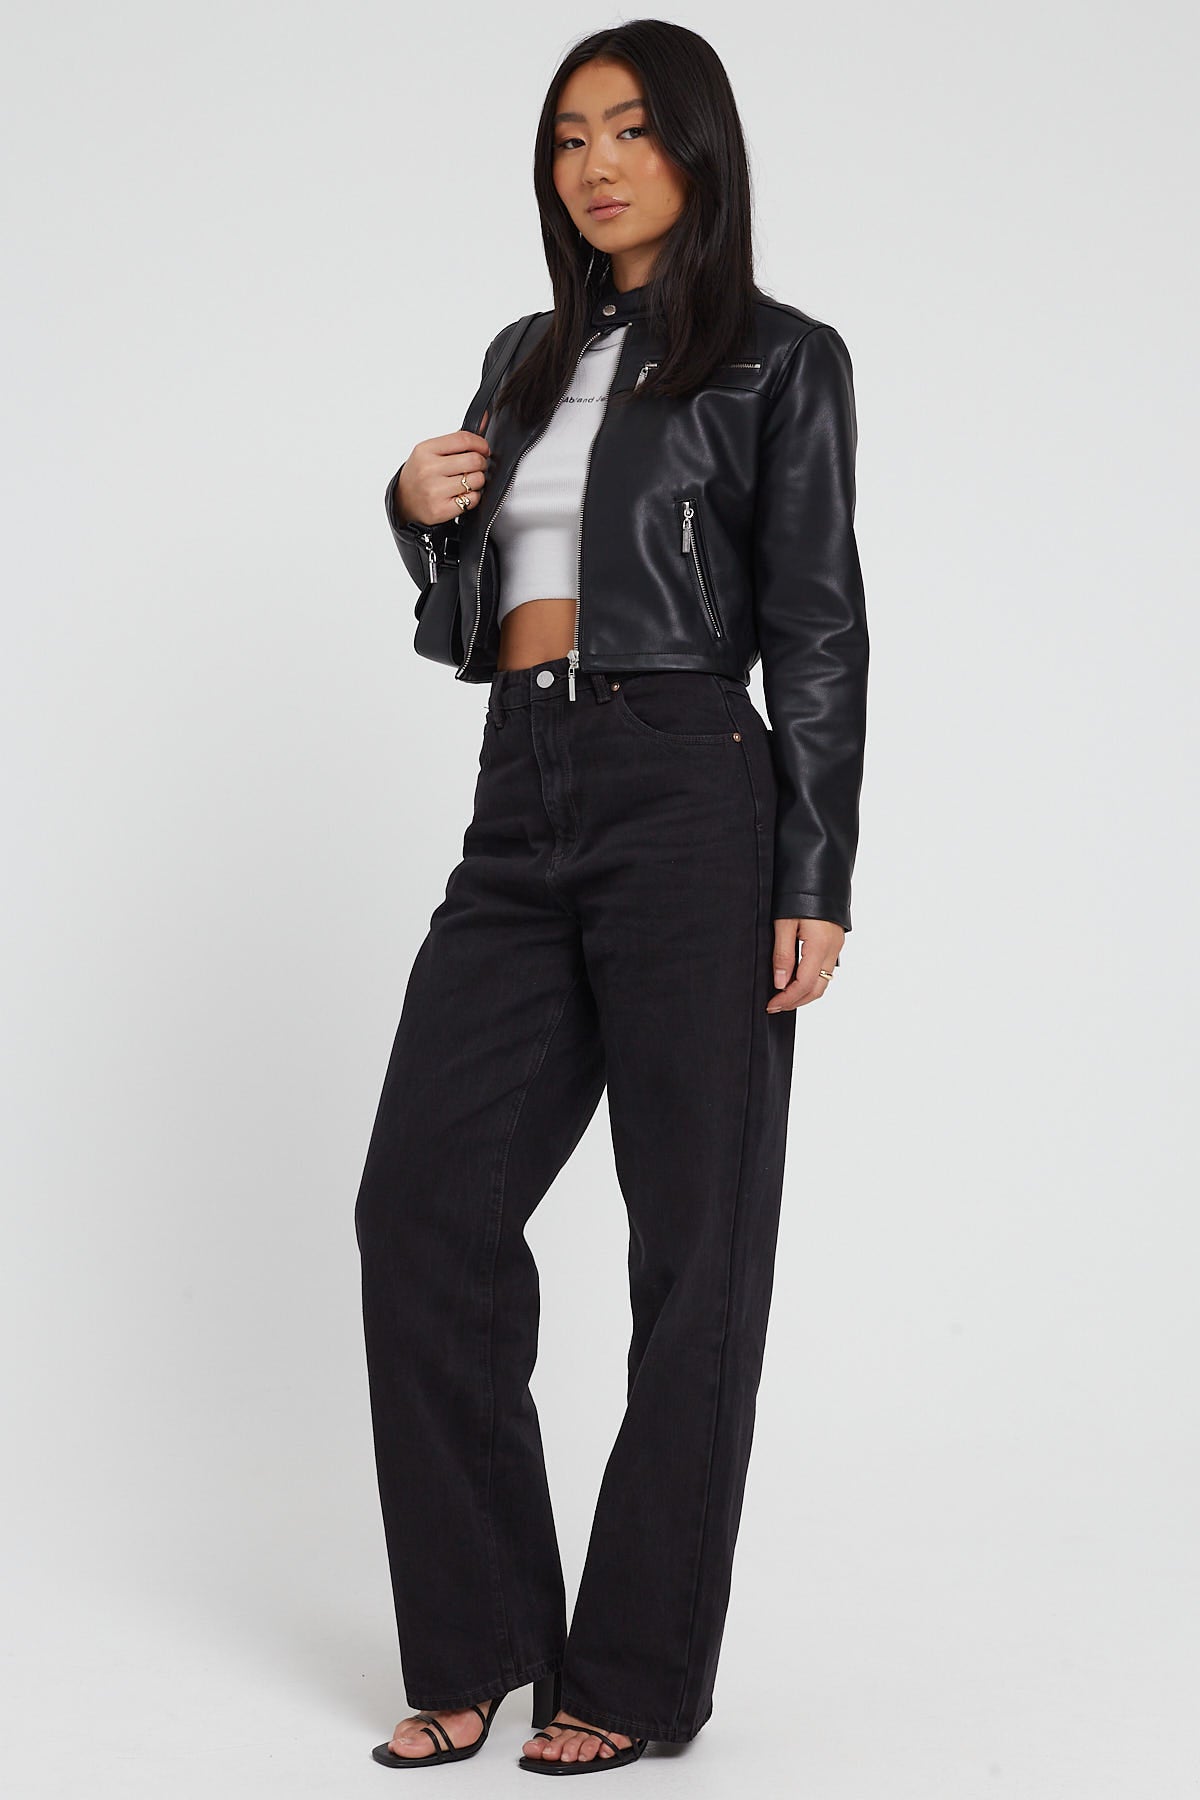 Abrand A Carrie Jean 90s Black